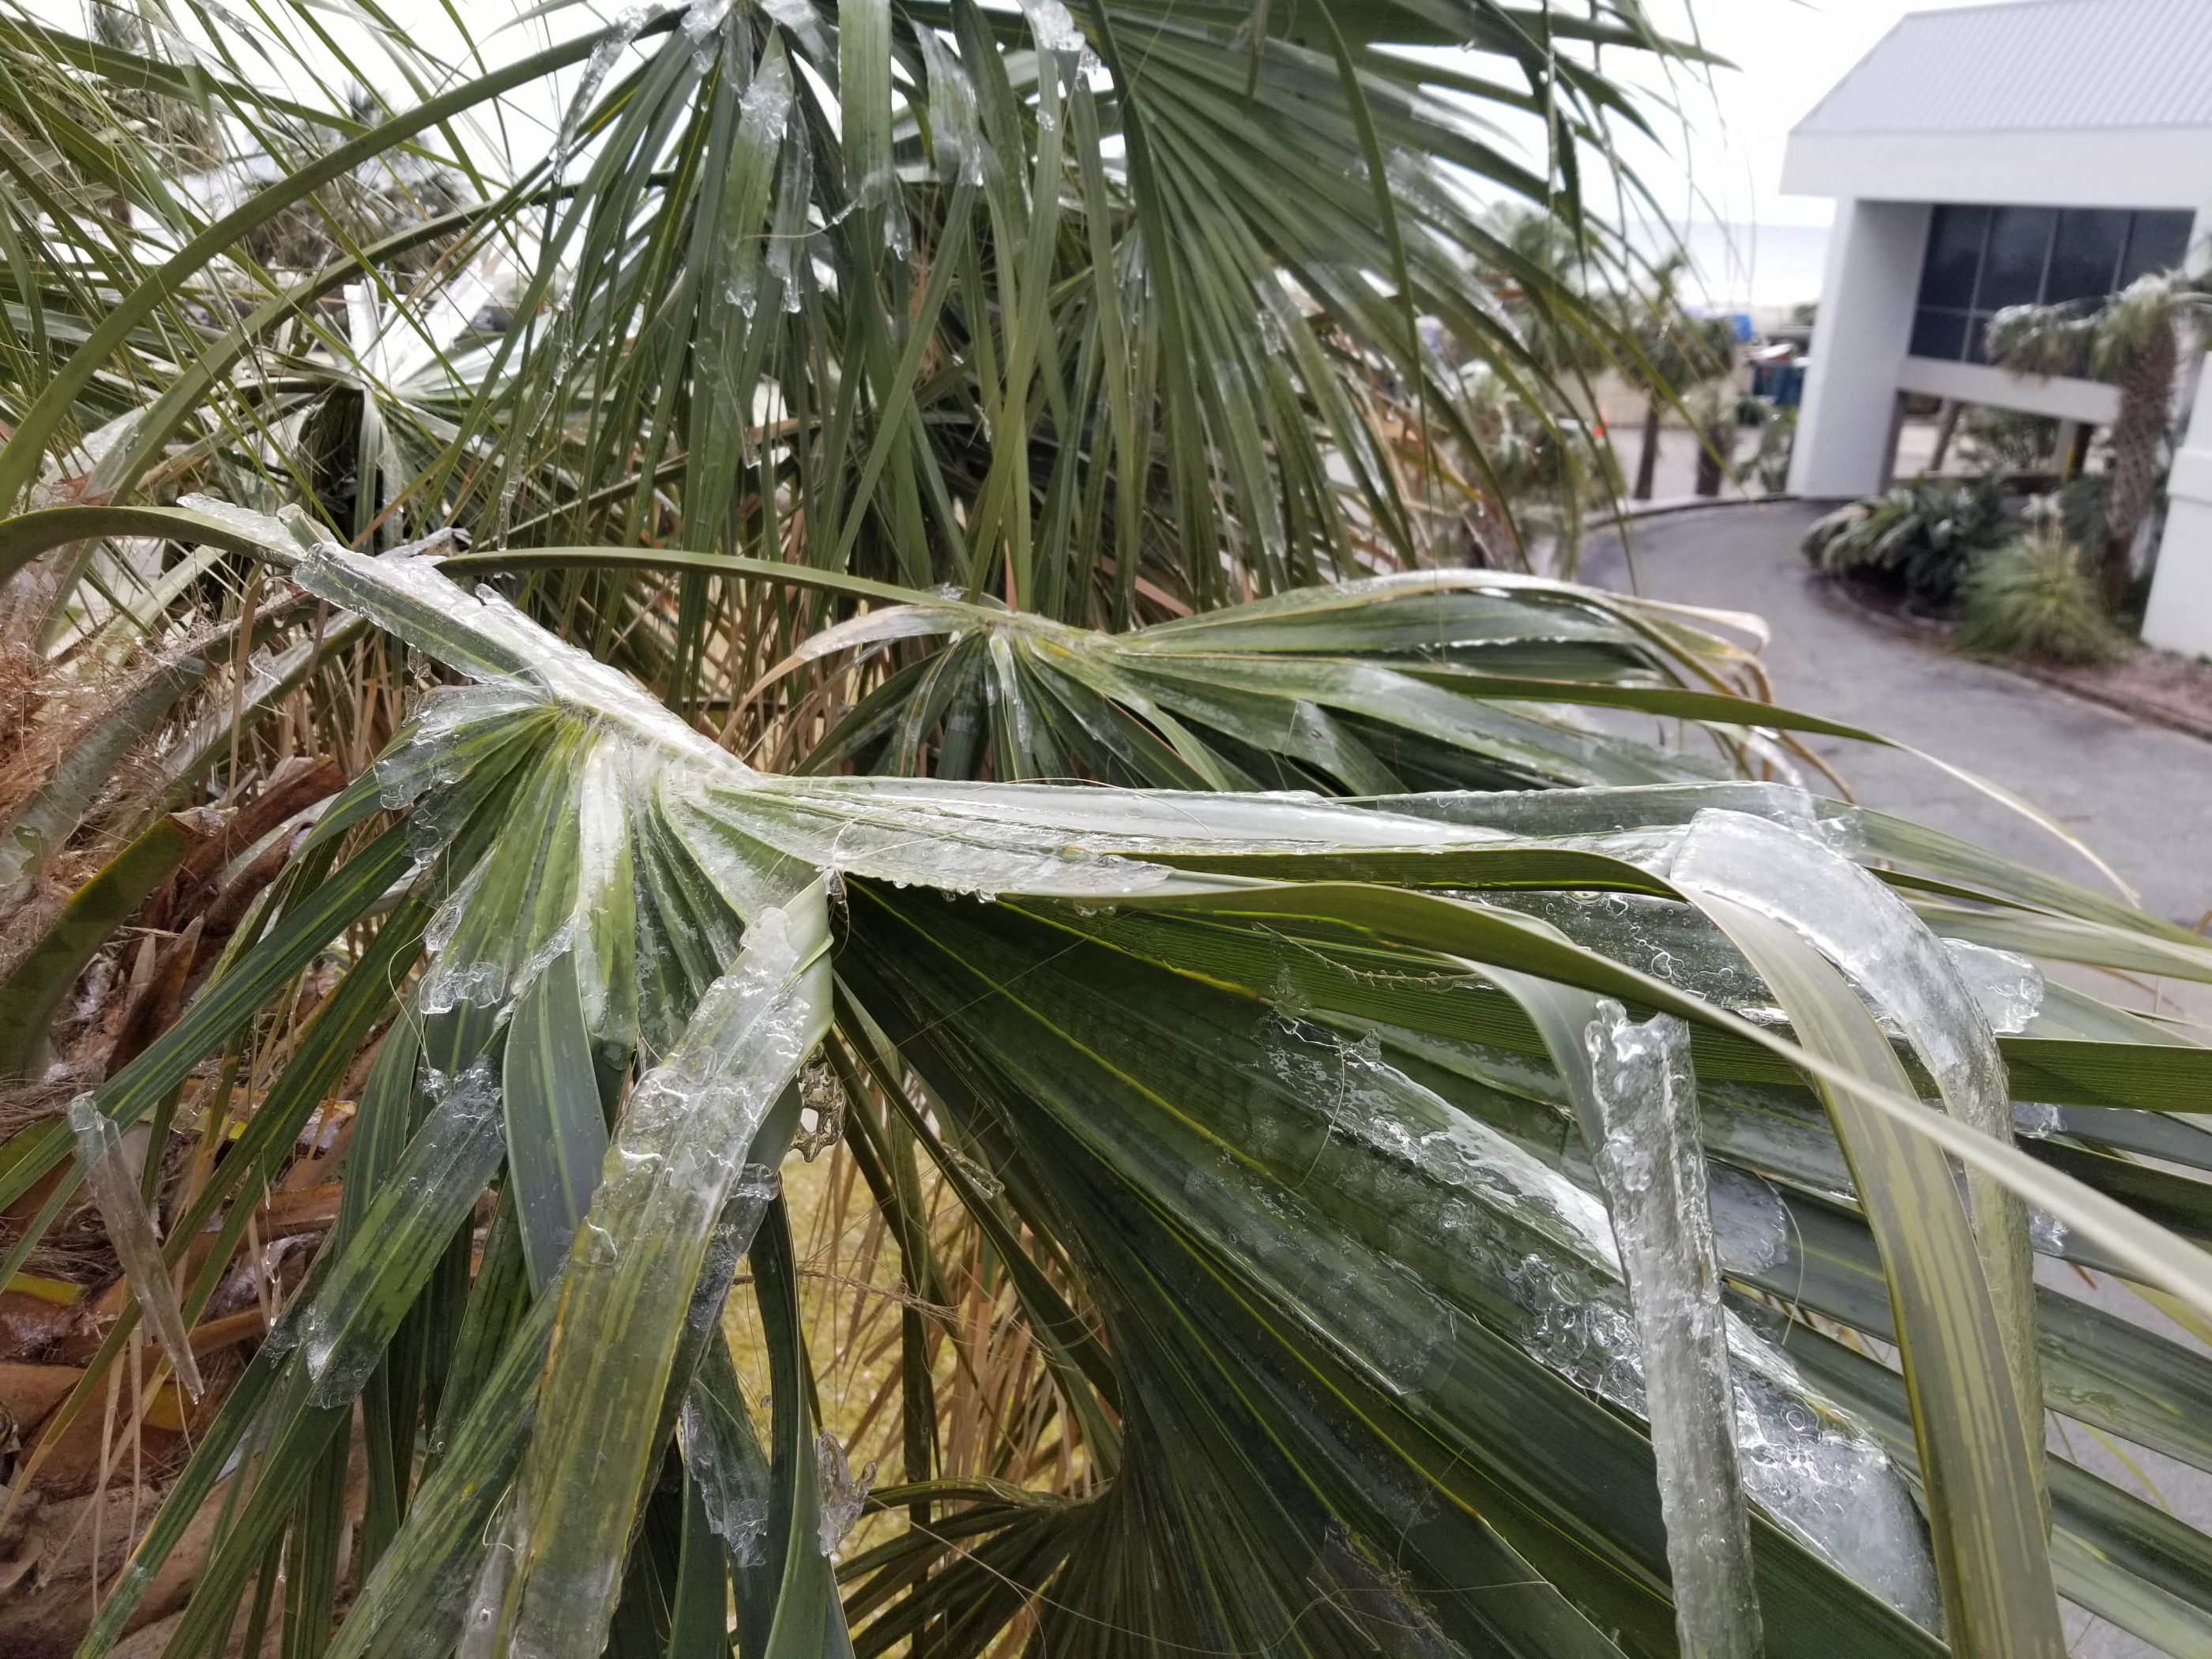 Icy palm leaves